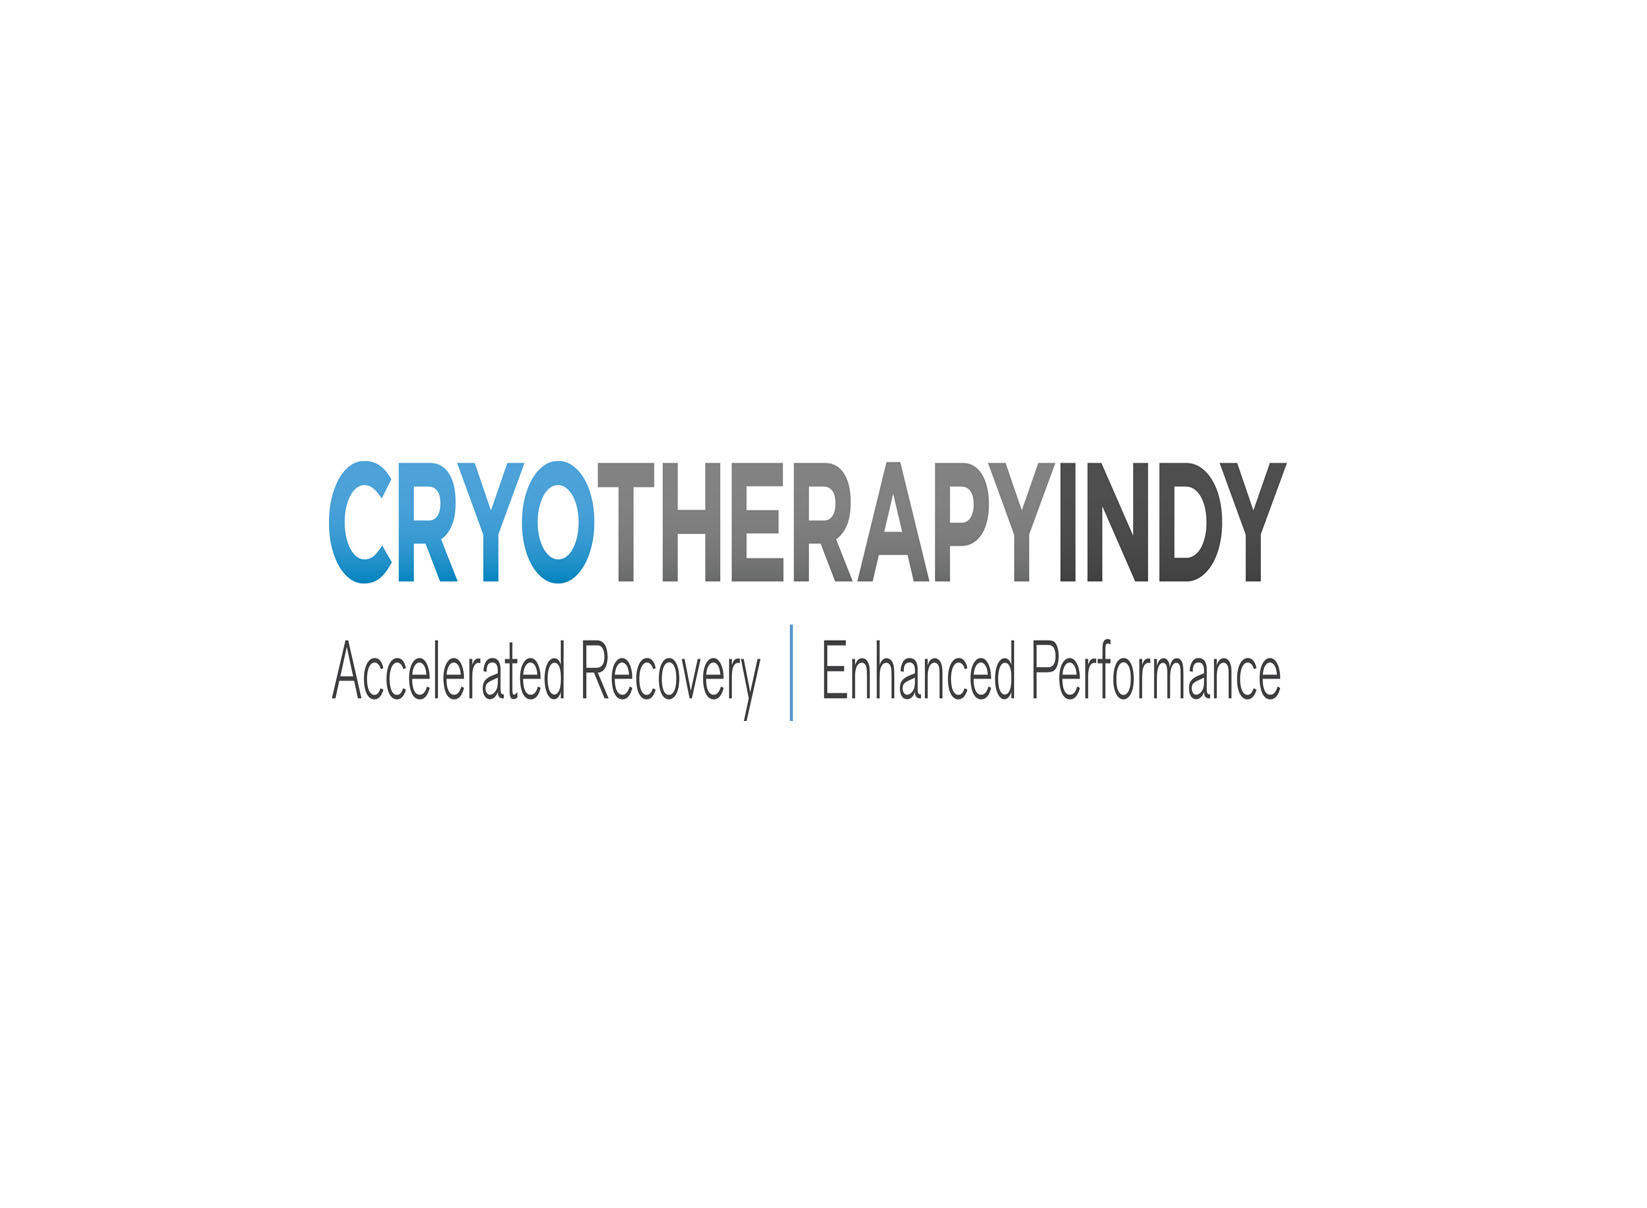 Whole Body Cryotherapy Services by Experts at Cryotherapy Indy